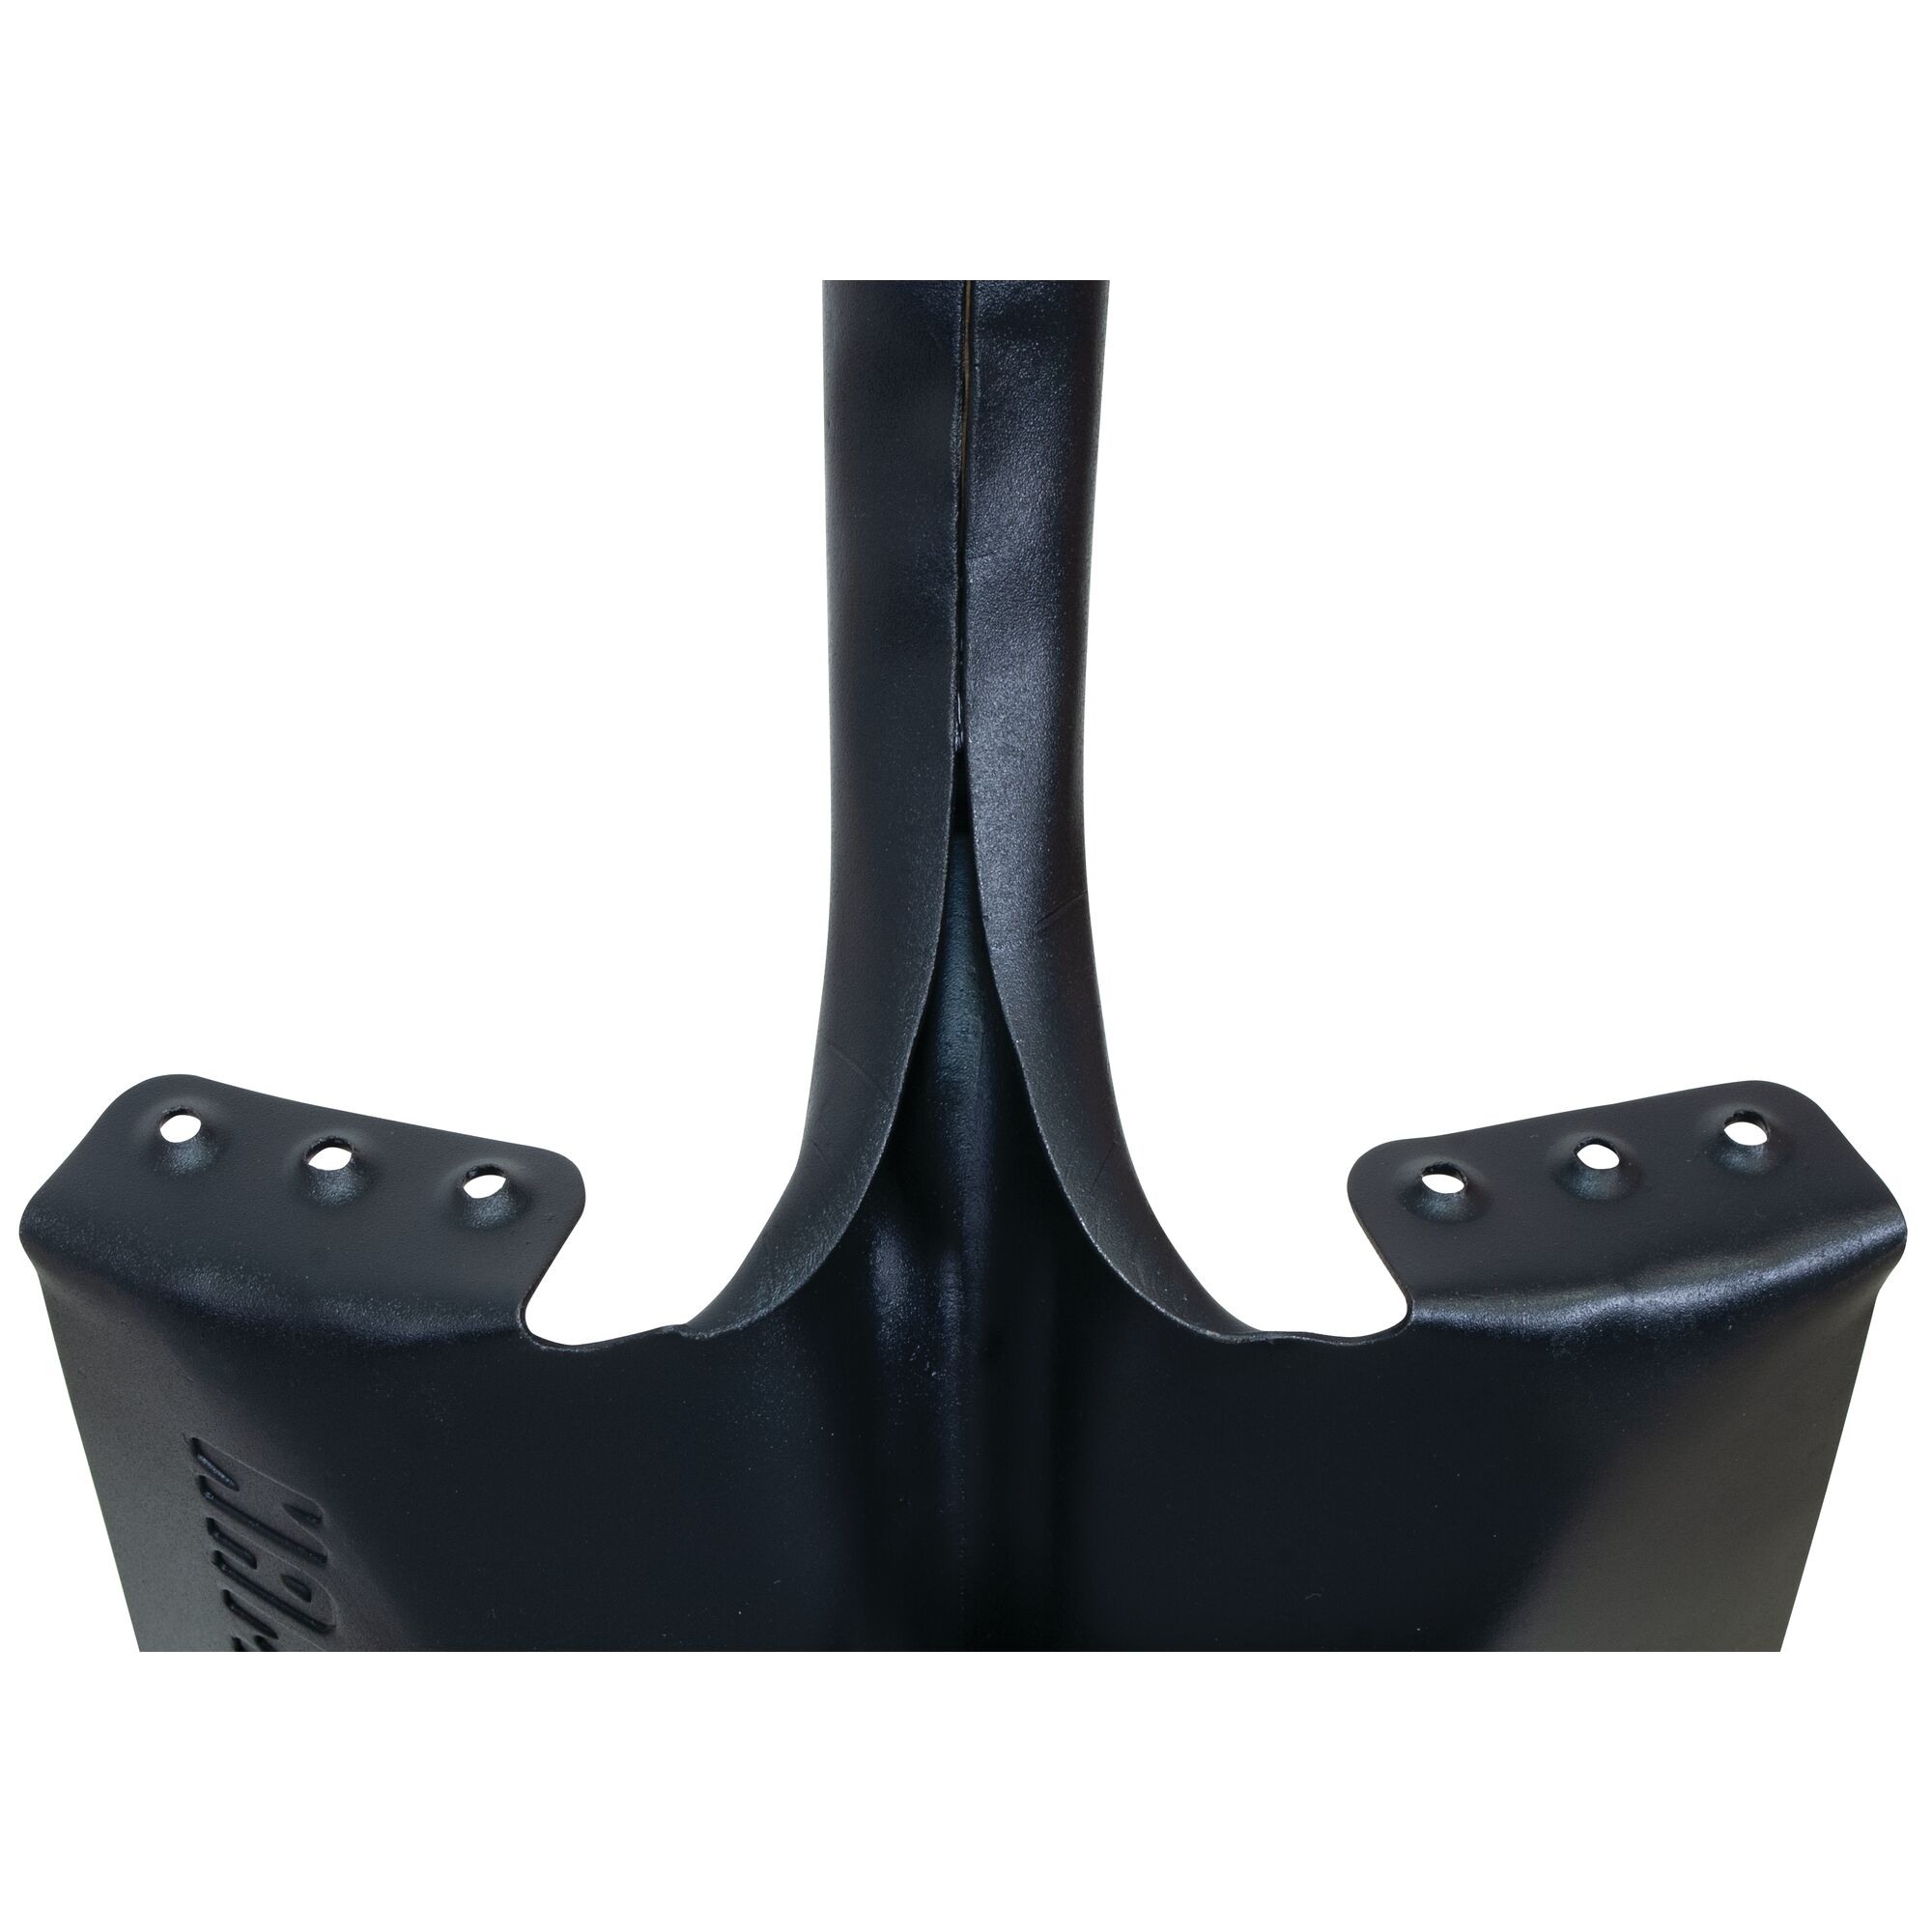 Power collar for secure shovel blade feature in wood handle transfer shovel.